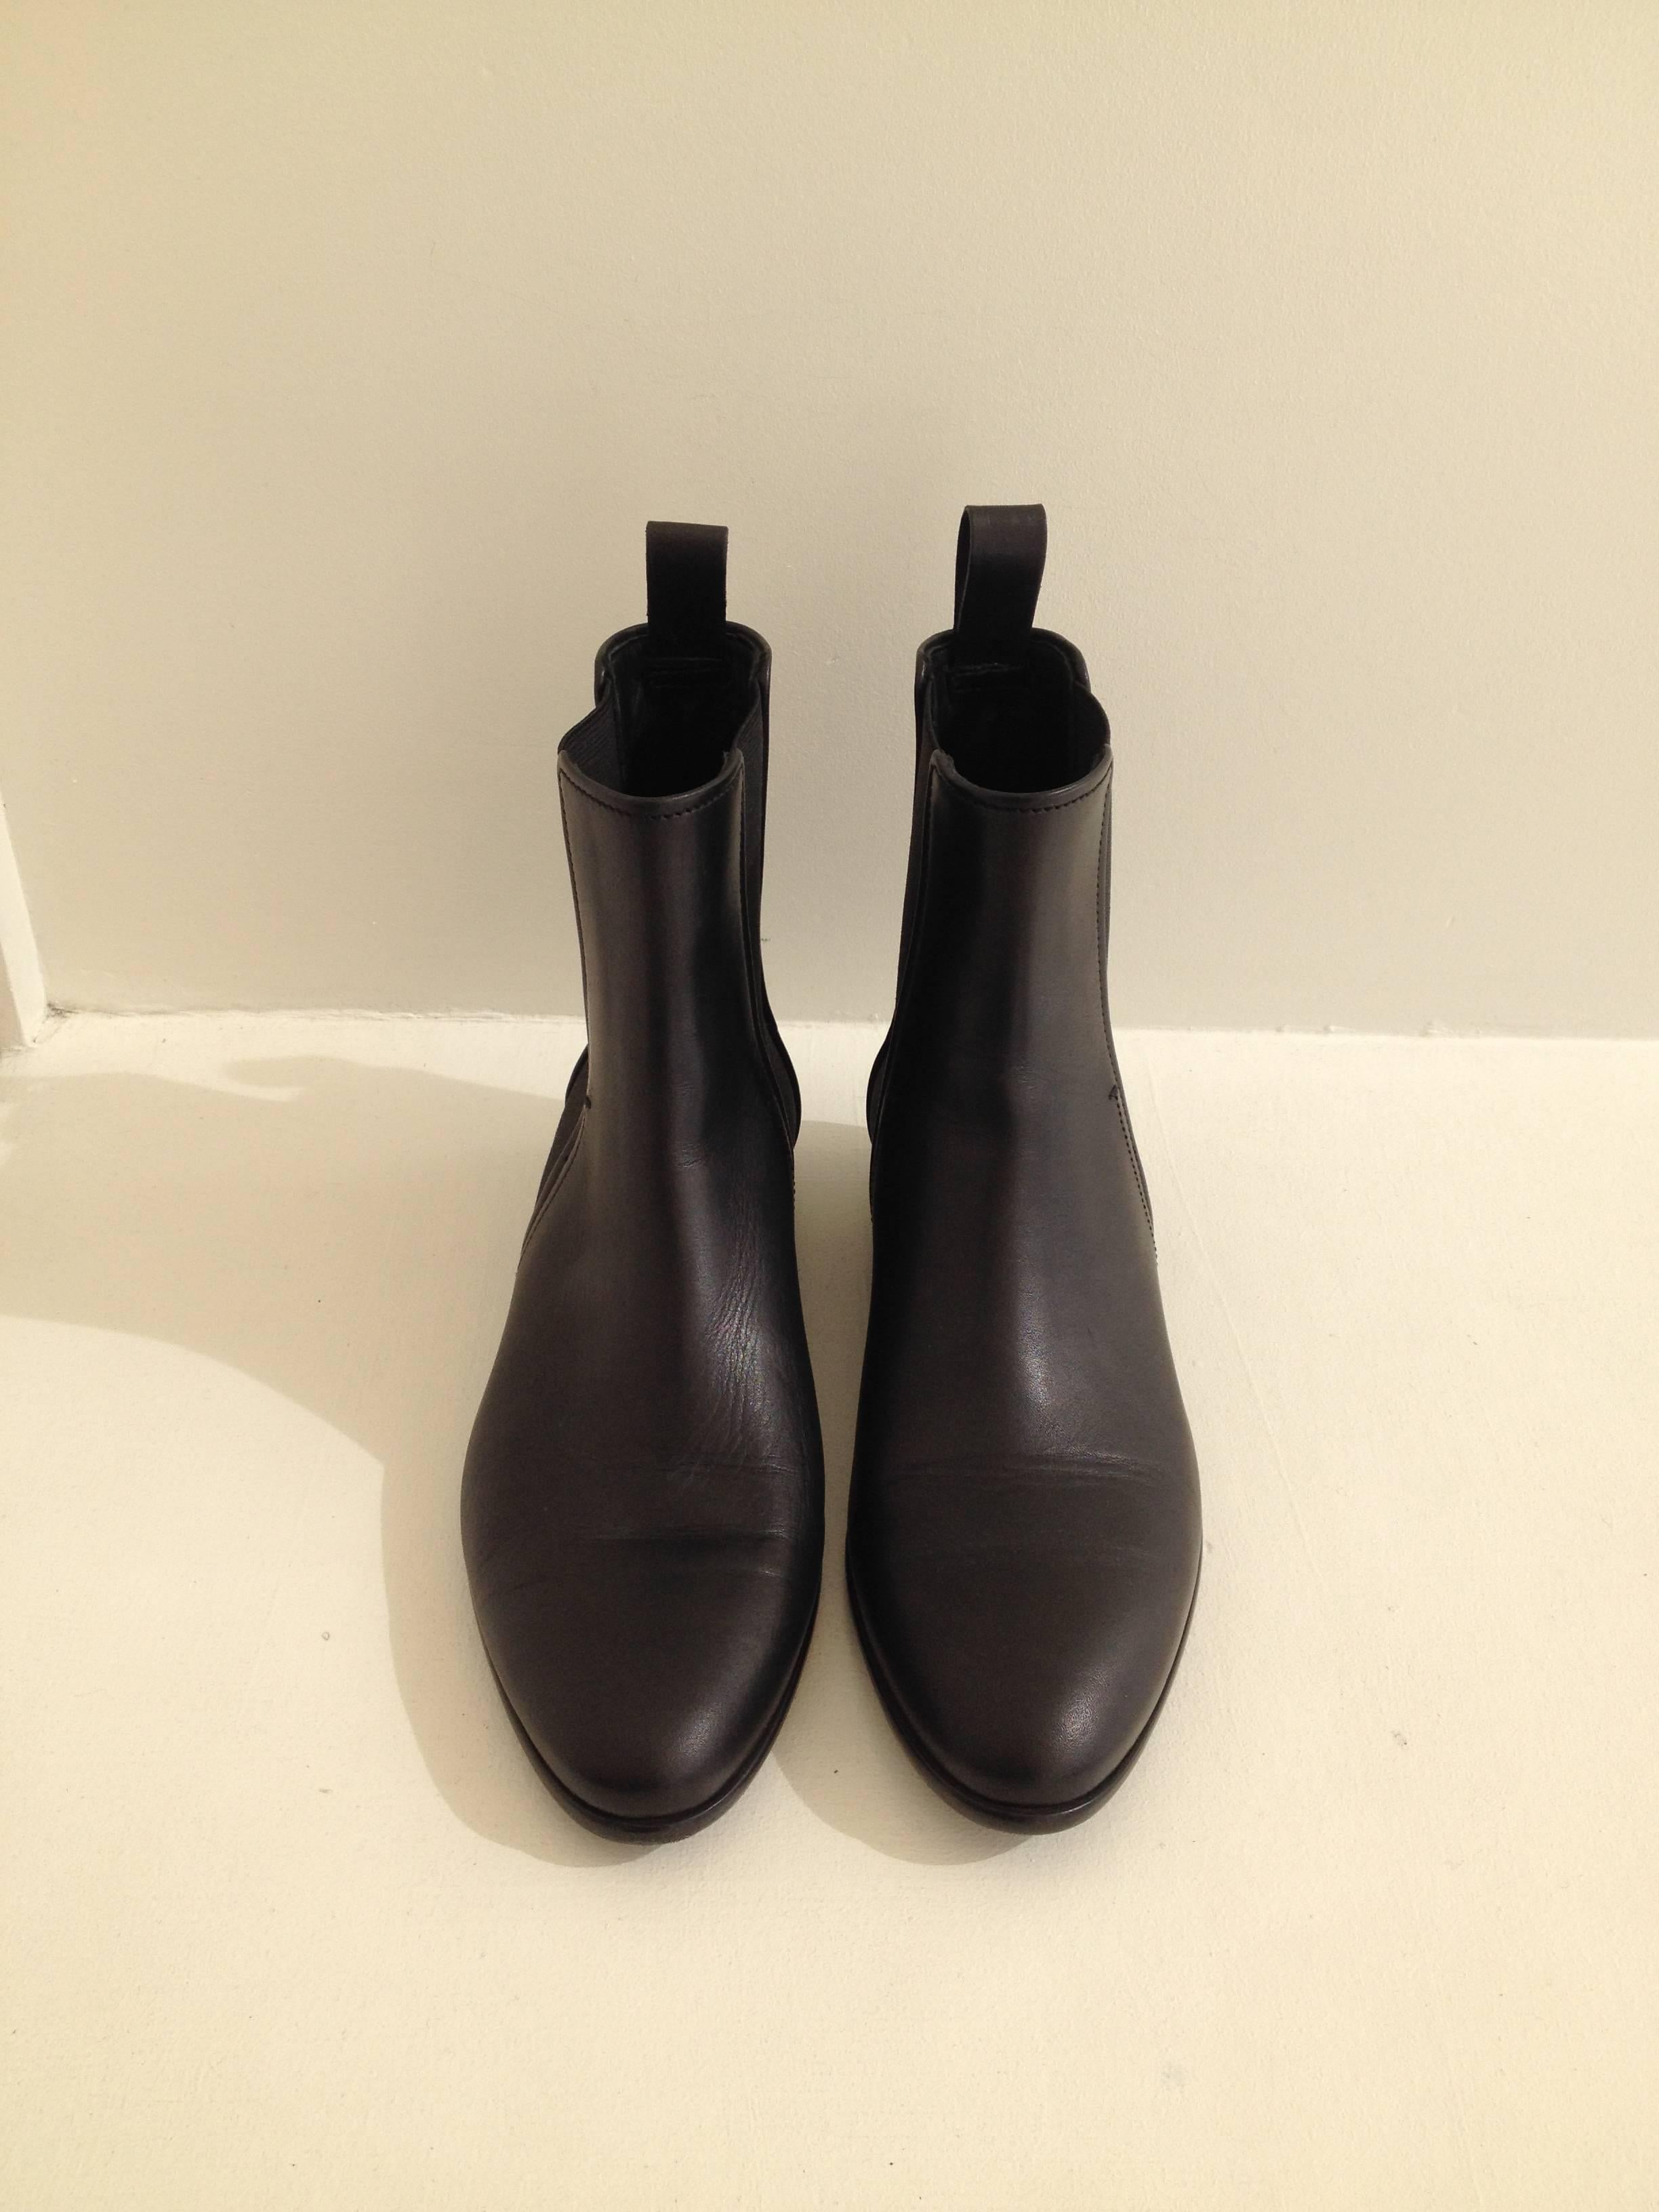 Simple and sleek, these boots are absolutely the perfect pair. The almond toe and three-quarter inch heel are classic and feminine, while the straight elastic side panels add a sharpness to the look. The shape is minimally styled, making them both